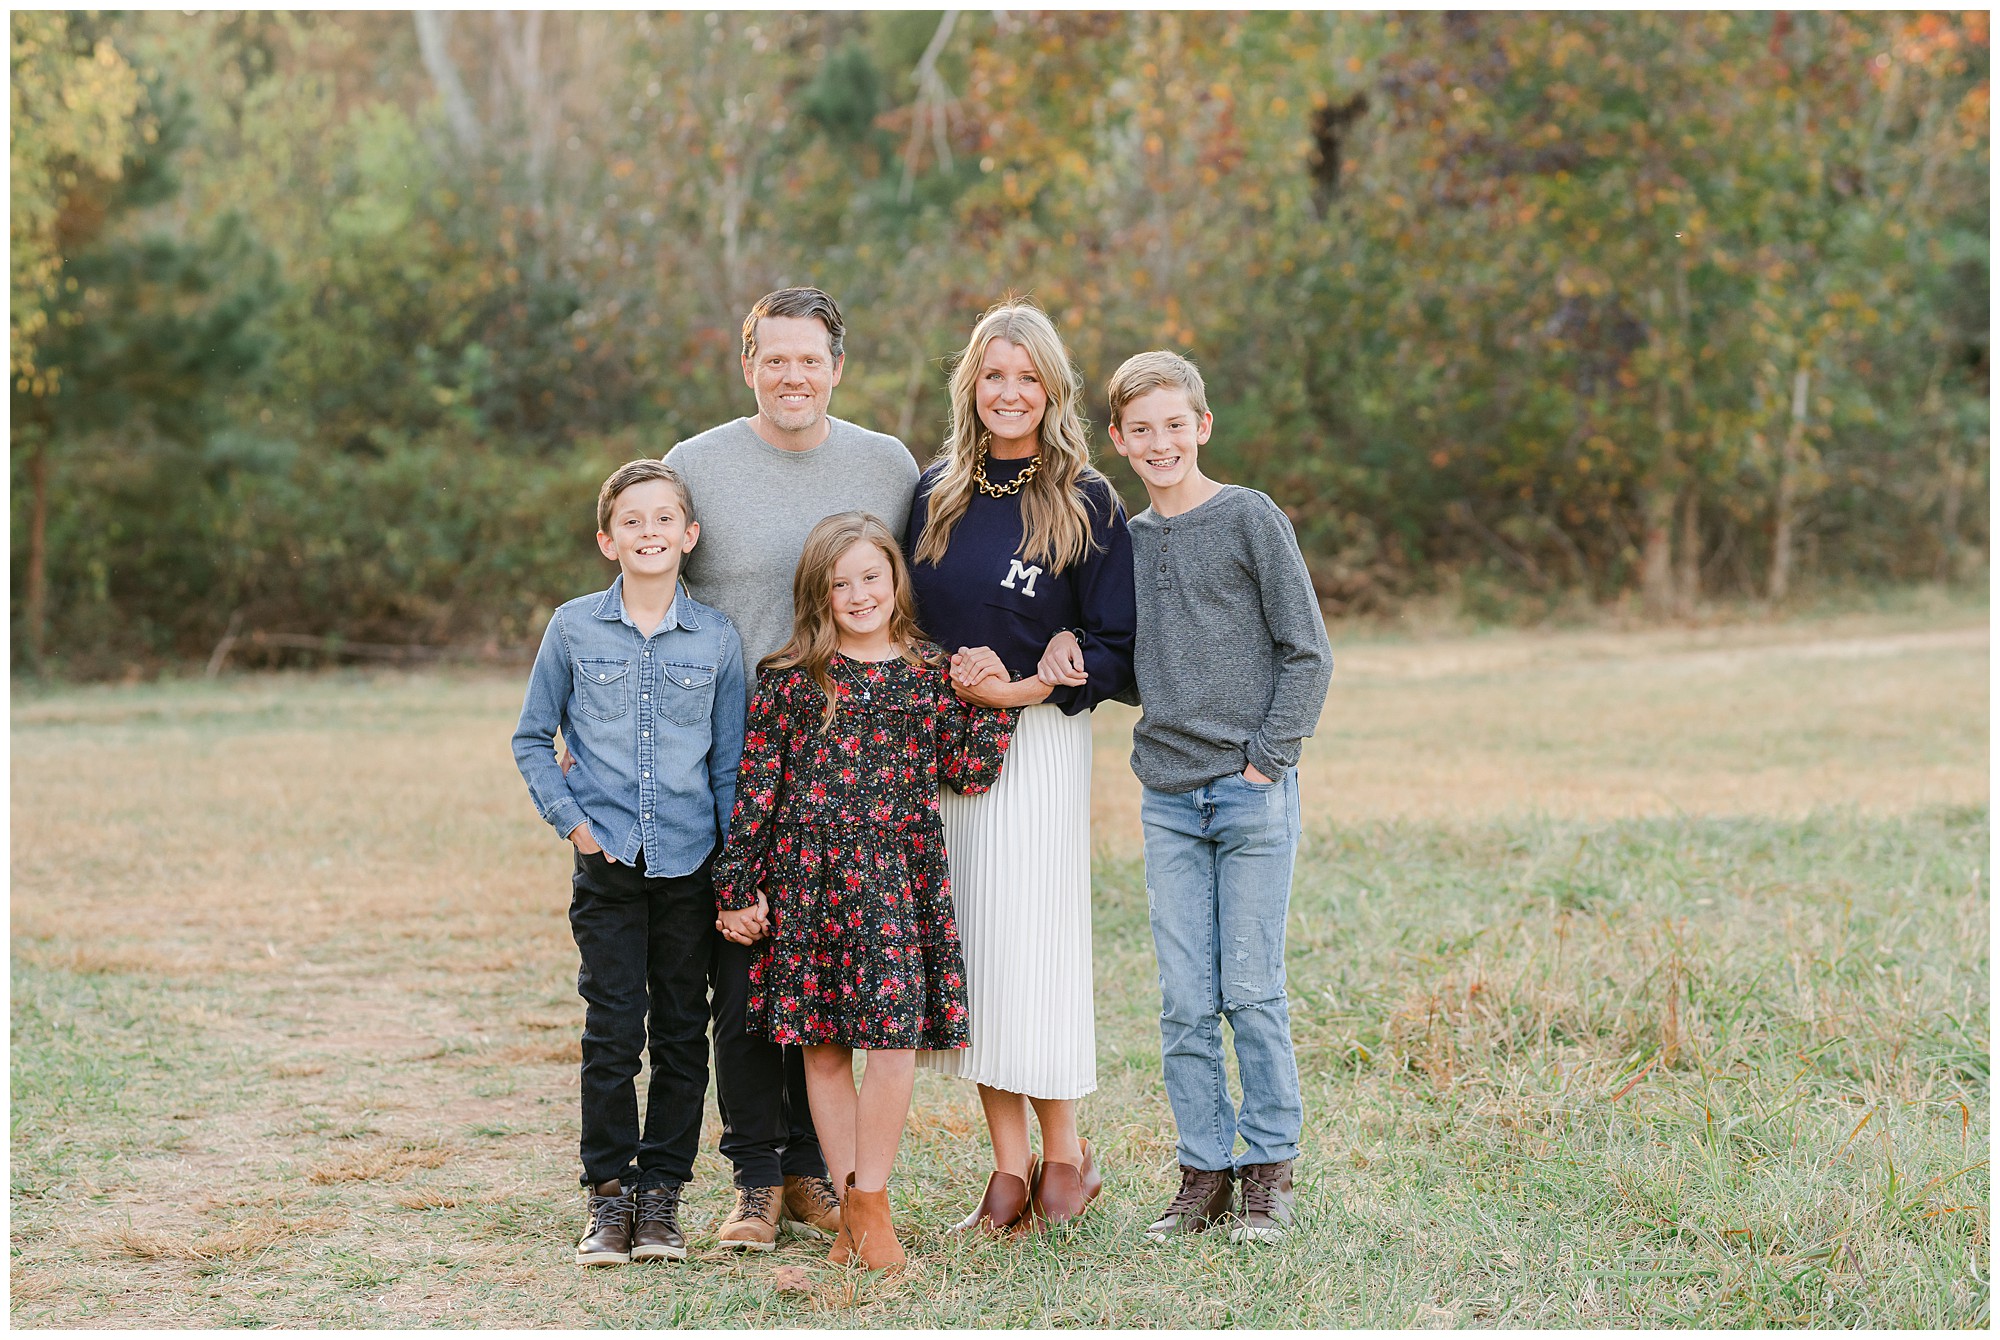 Parents standing with their two sons and daughter in a green field during fall for a portrait by a Marietta family photographer.